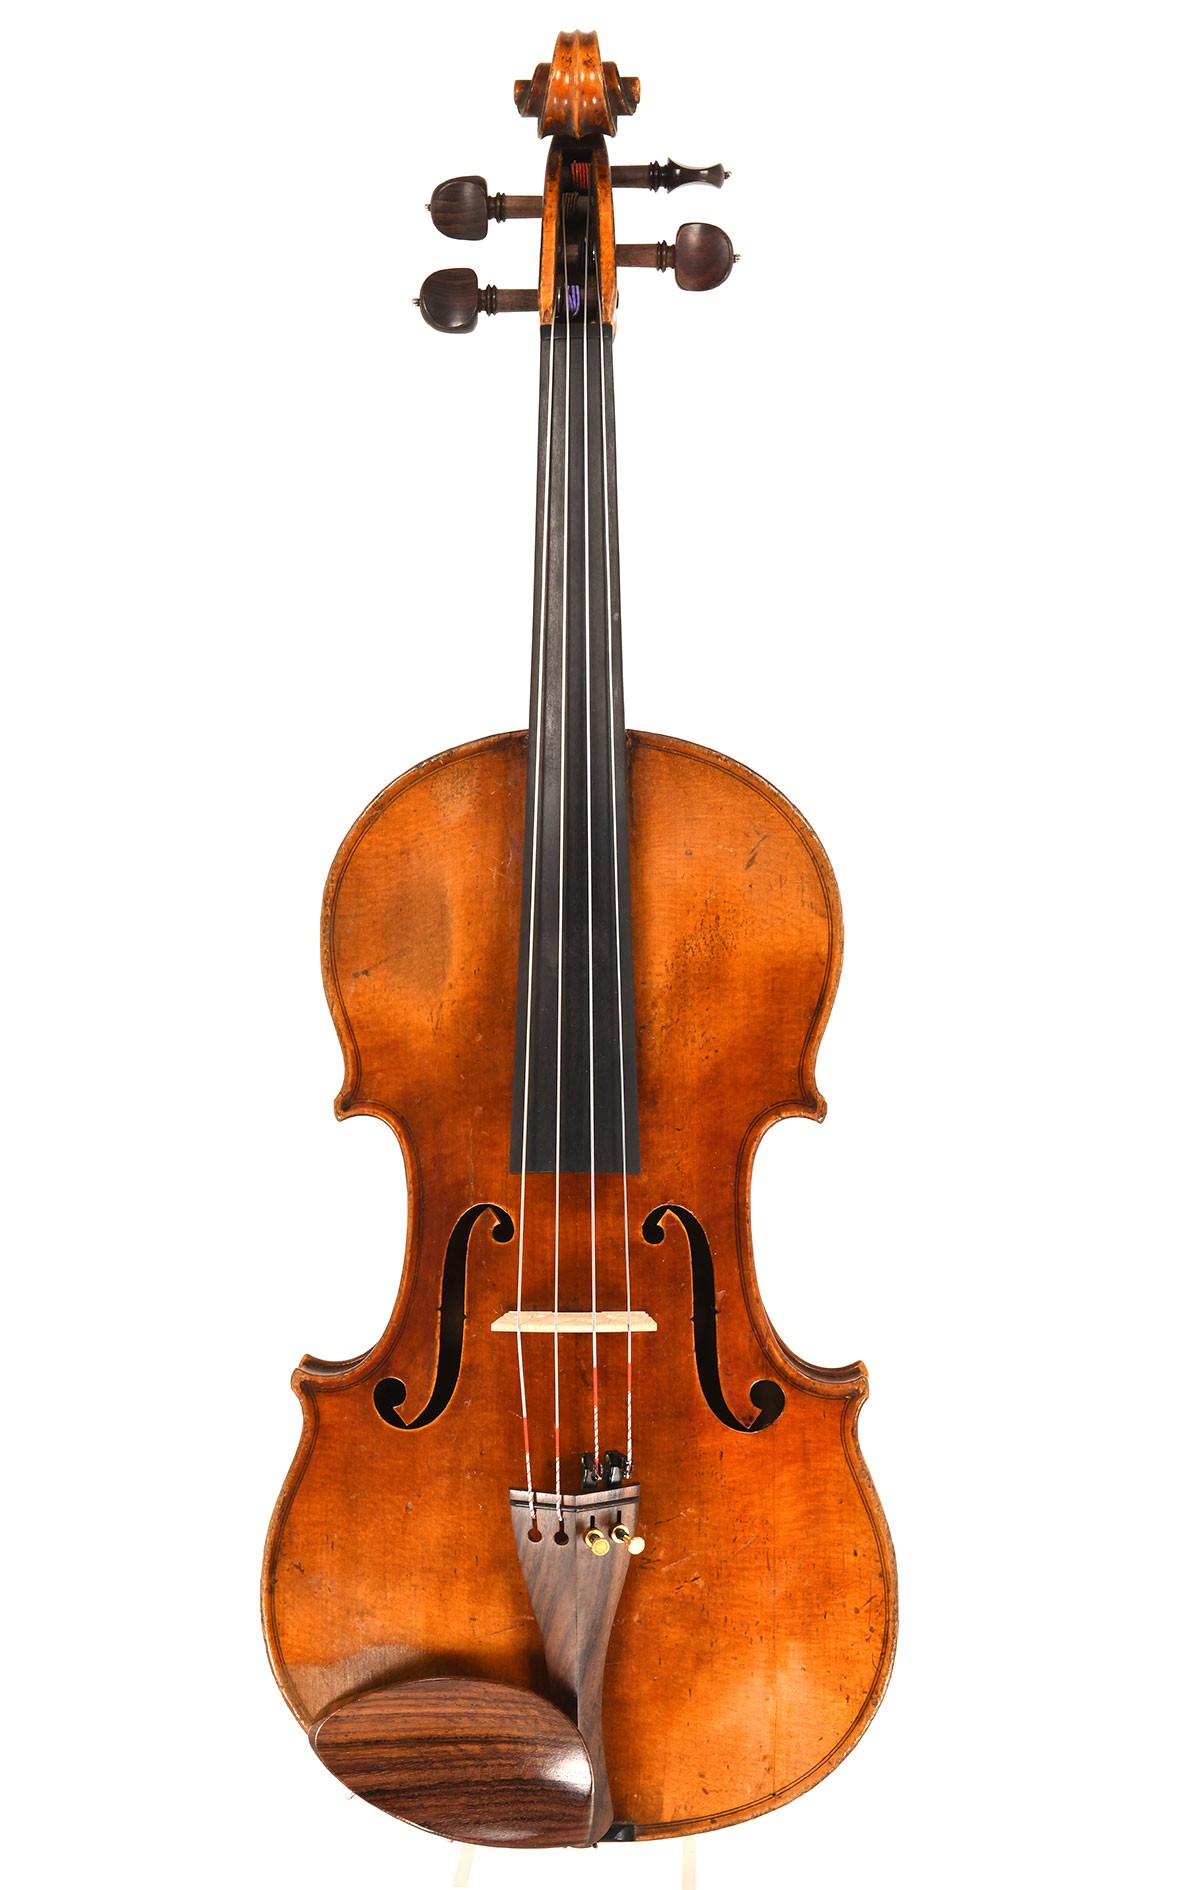 Small French viola from Mirecourt, 19th century - 38 cm bodylength